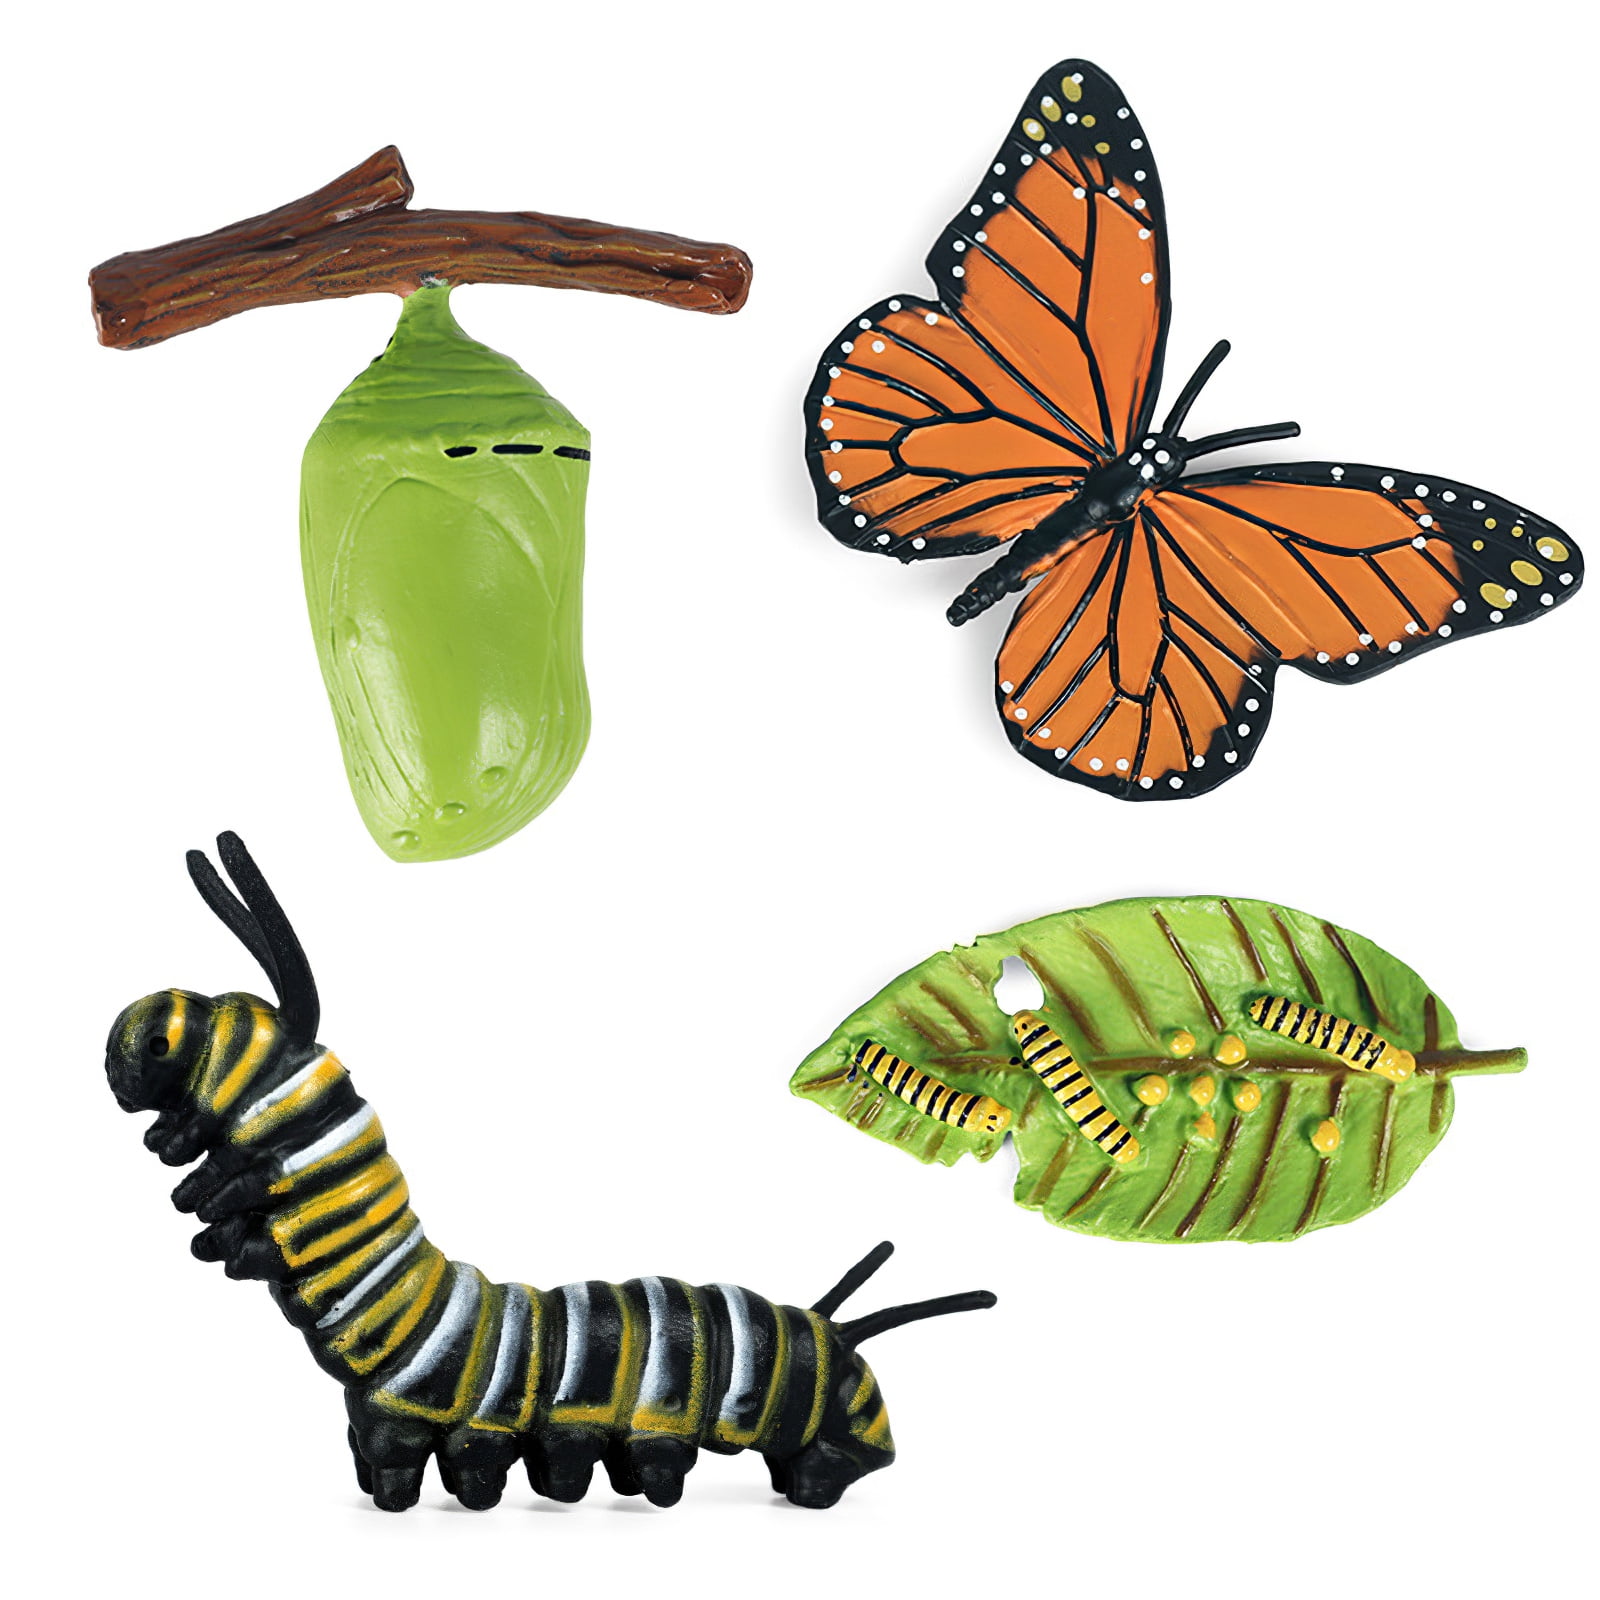 Plastic Nature Insects Growth Cycle Life Cycle Animal Figure Model Toys Teaching 